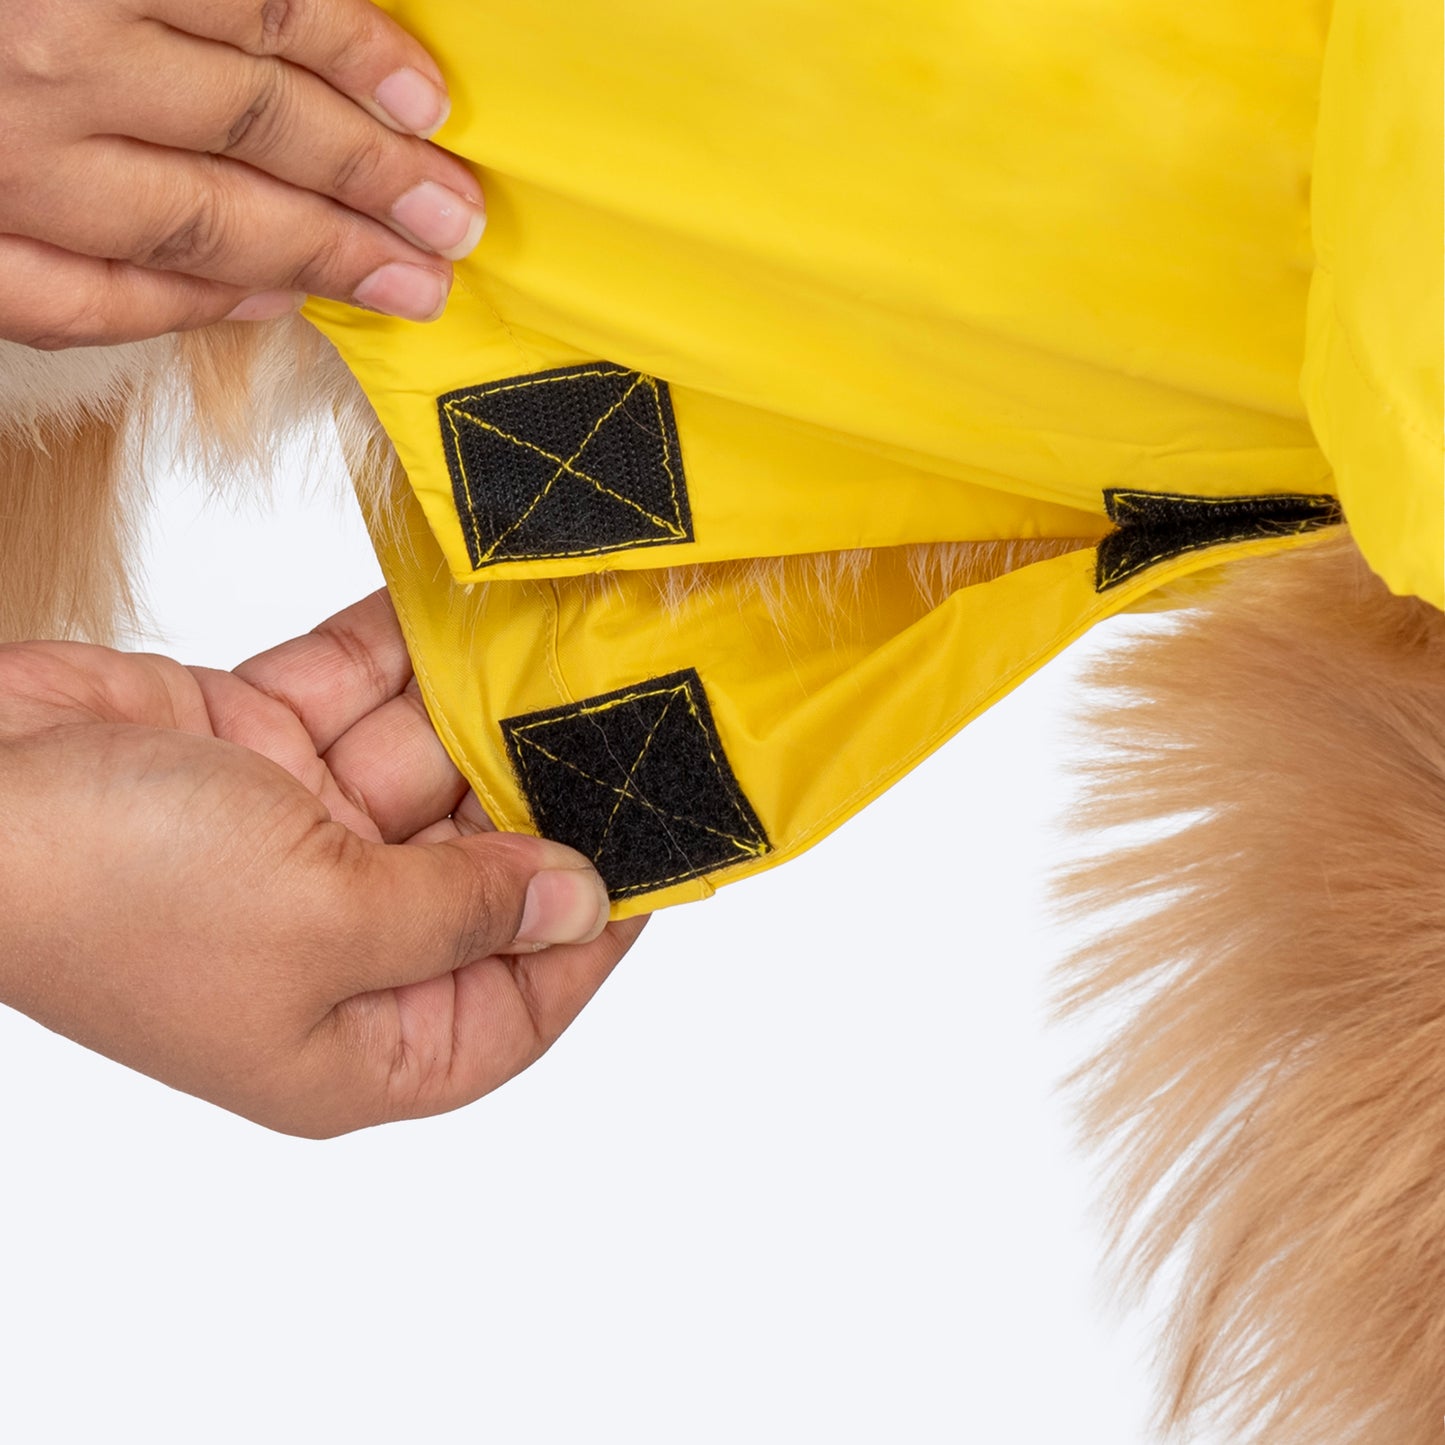 HUFT Magical Mist Raincoats for Pets - Sunshine Yellow - Heads Up For Tails